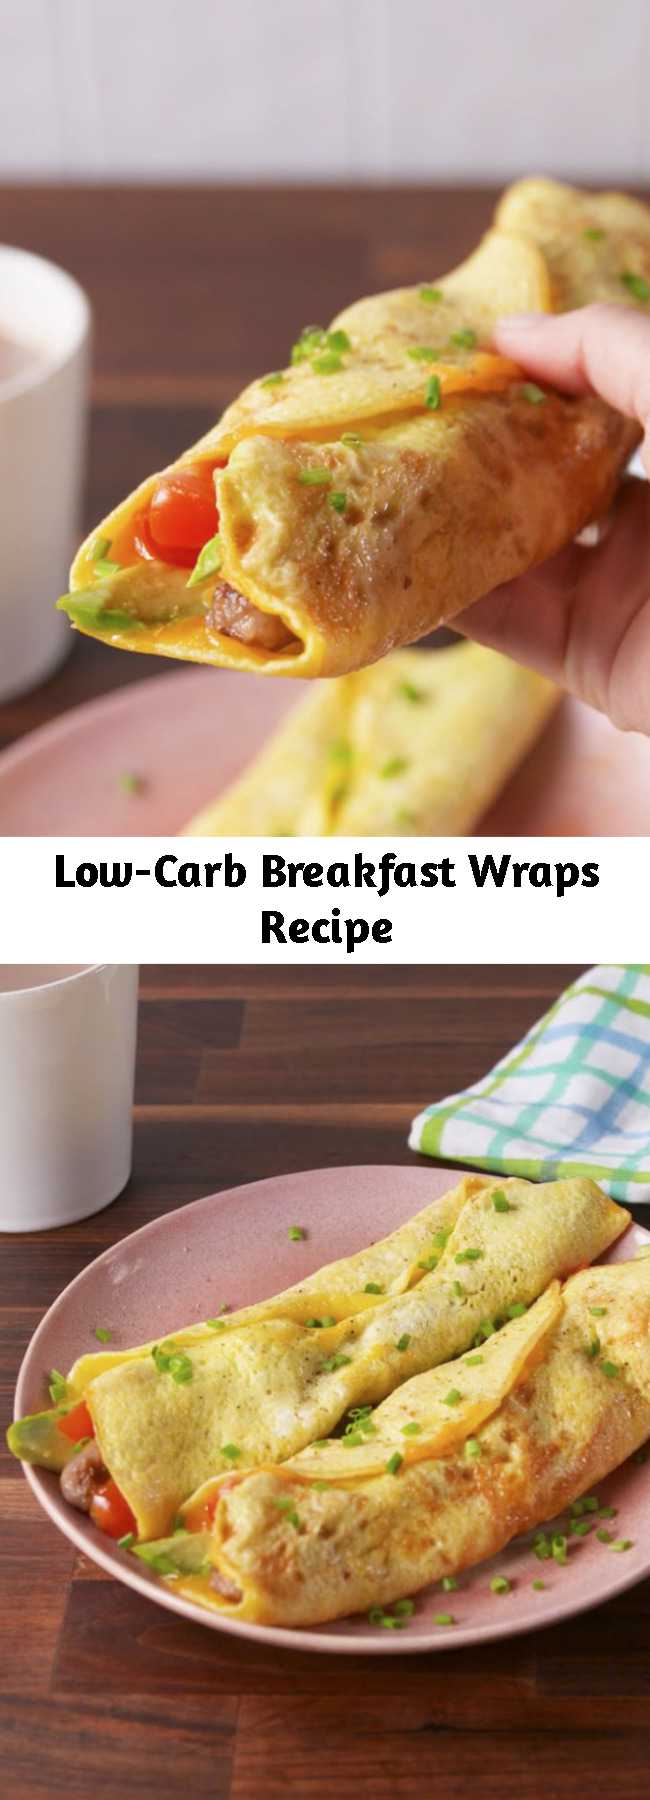 Low-Carb Breakfast Wraps Recipe - These are the best way to start your day.